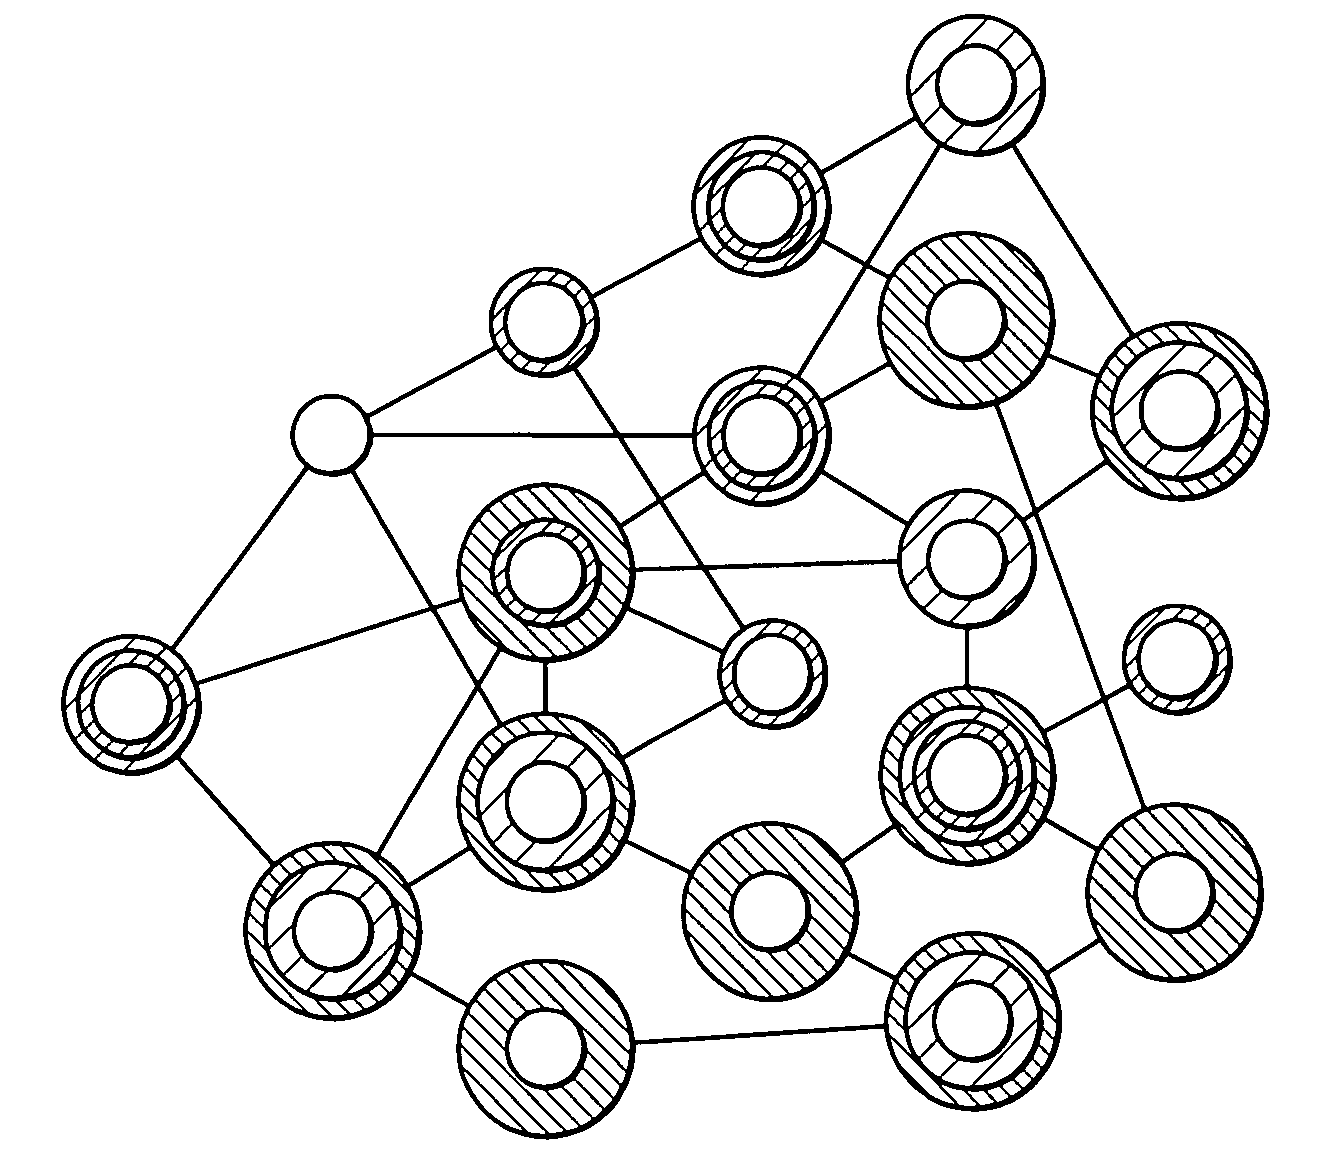 Multiple interest matchmaking in personal business networks